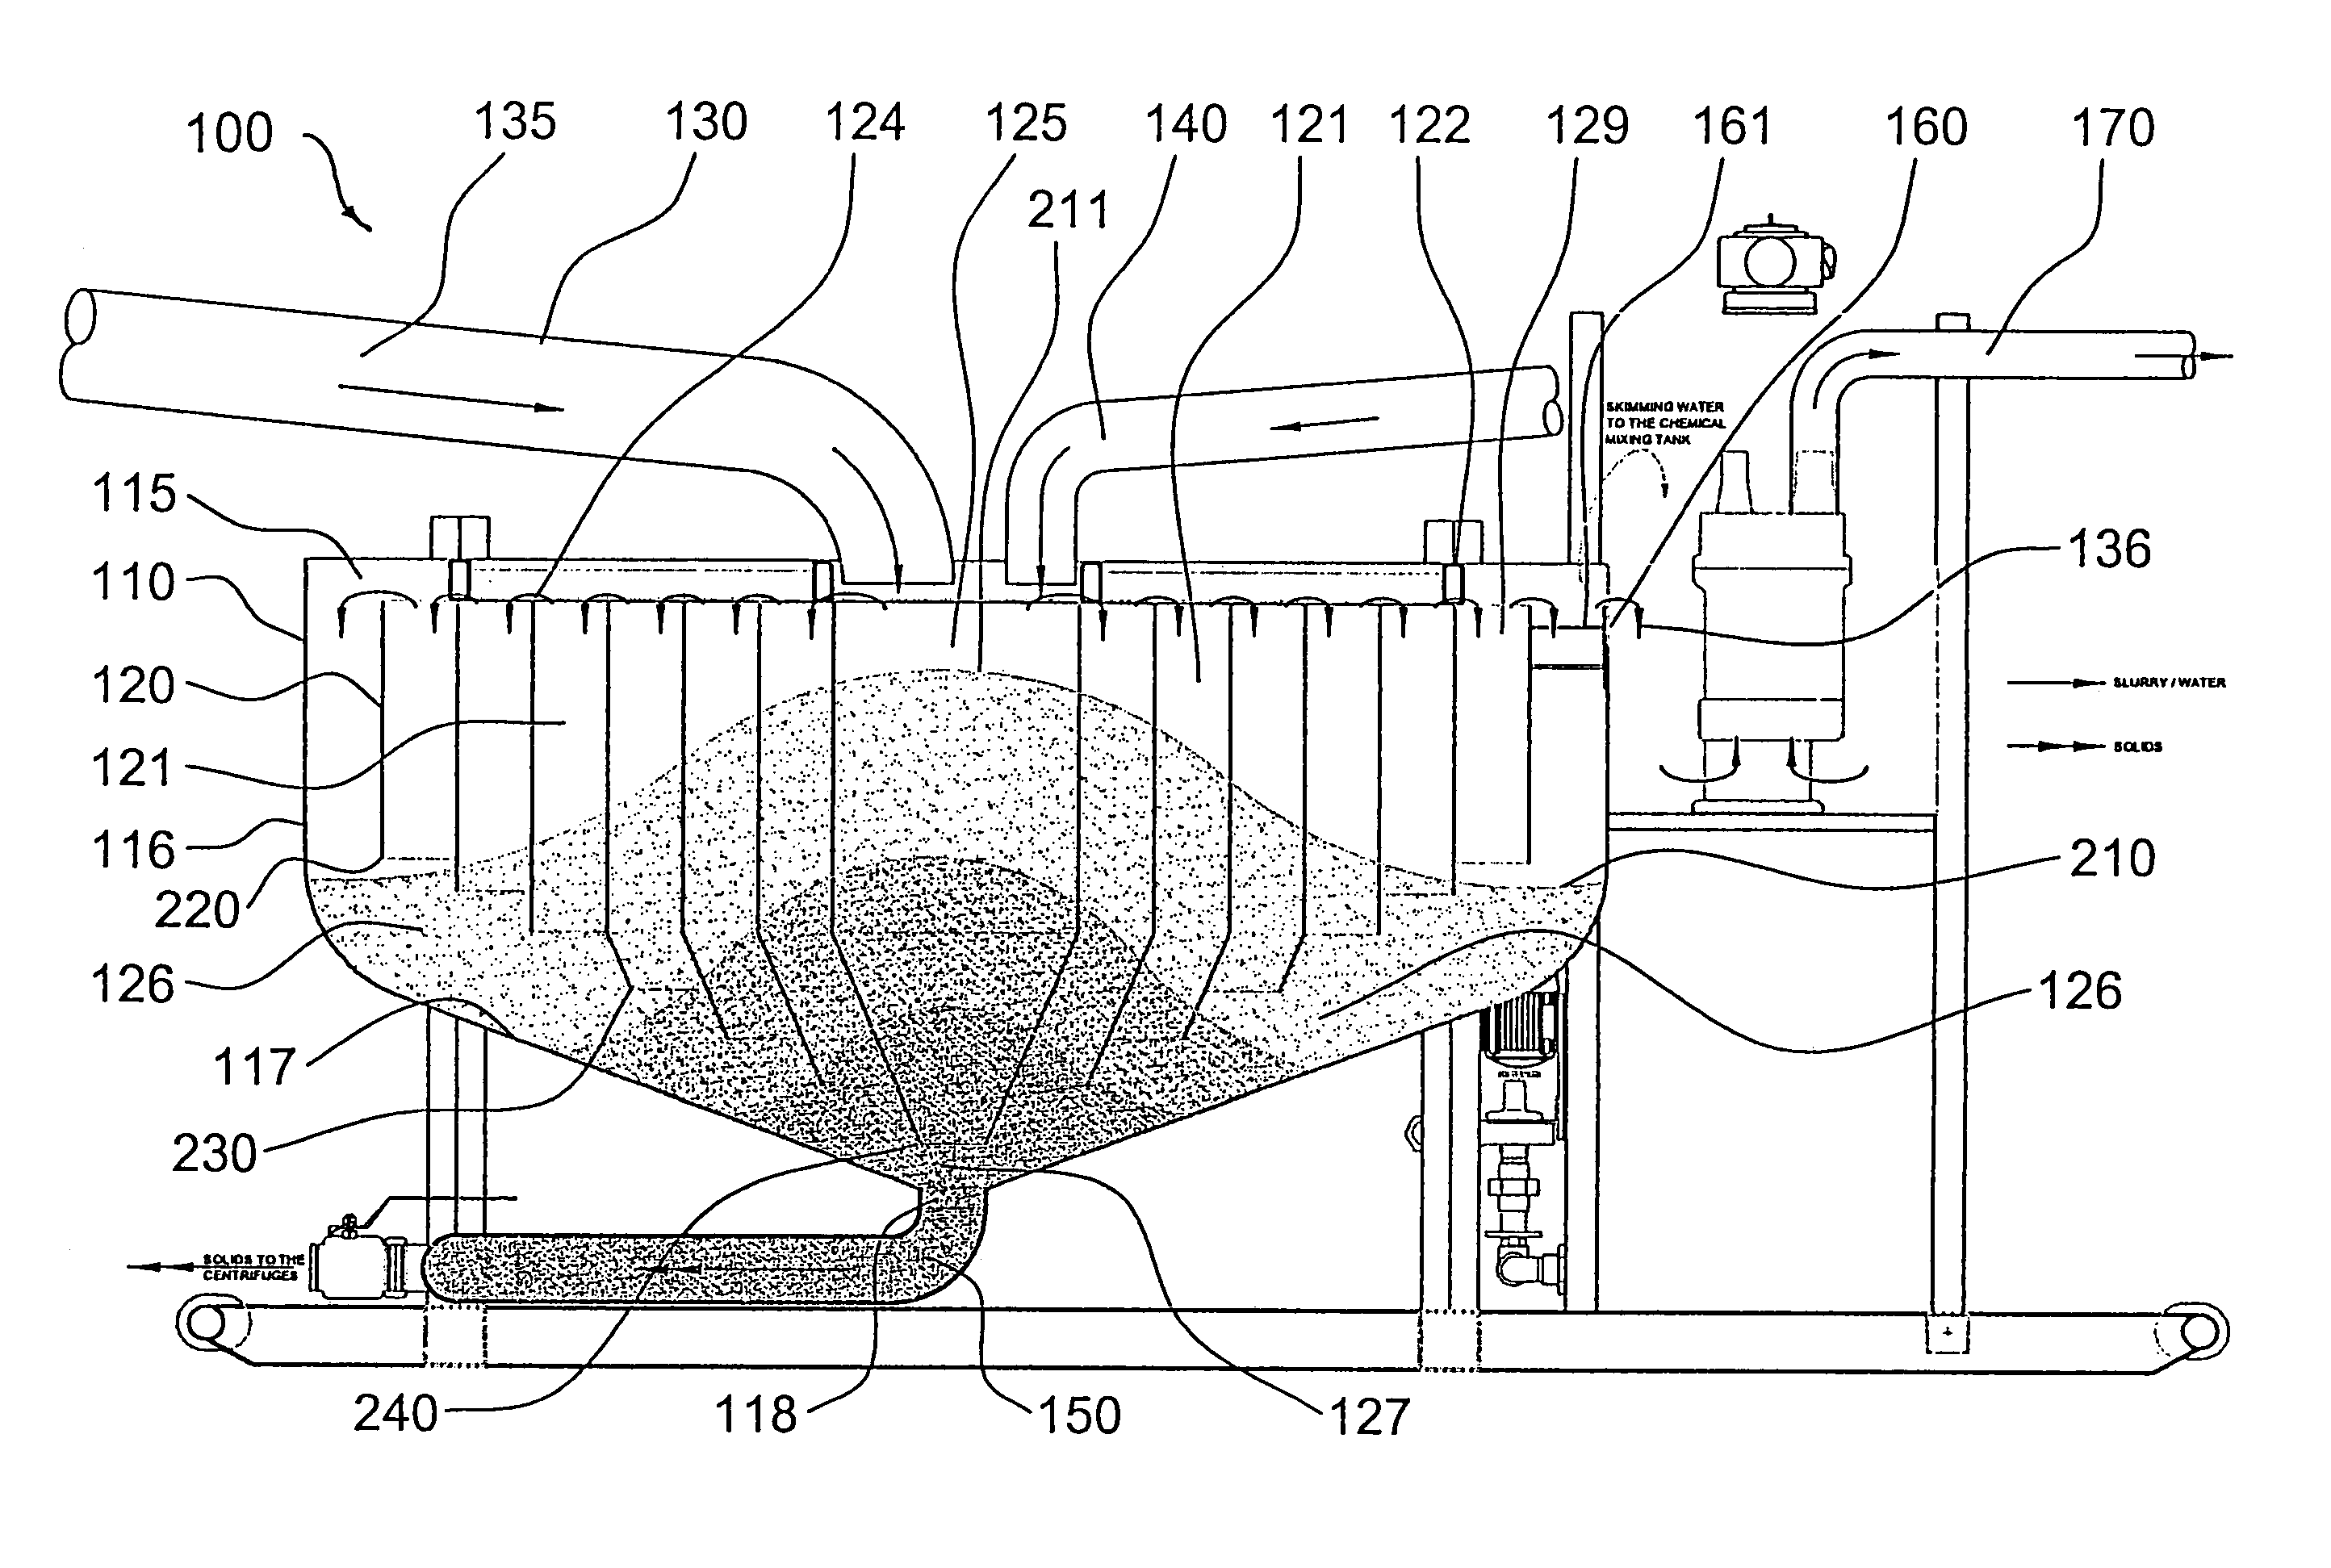 Apparatus and system for concentrating slurry solids